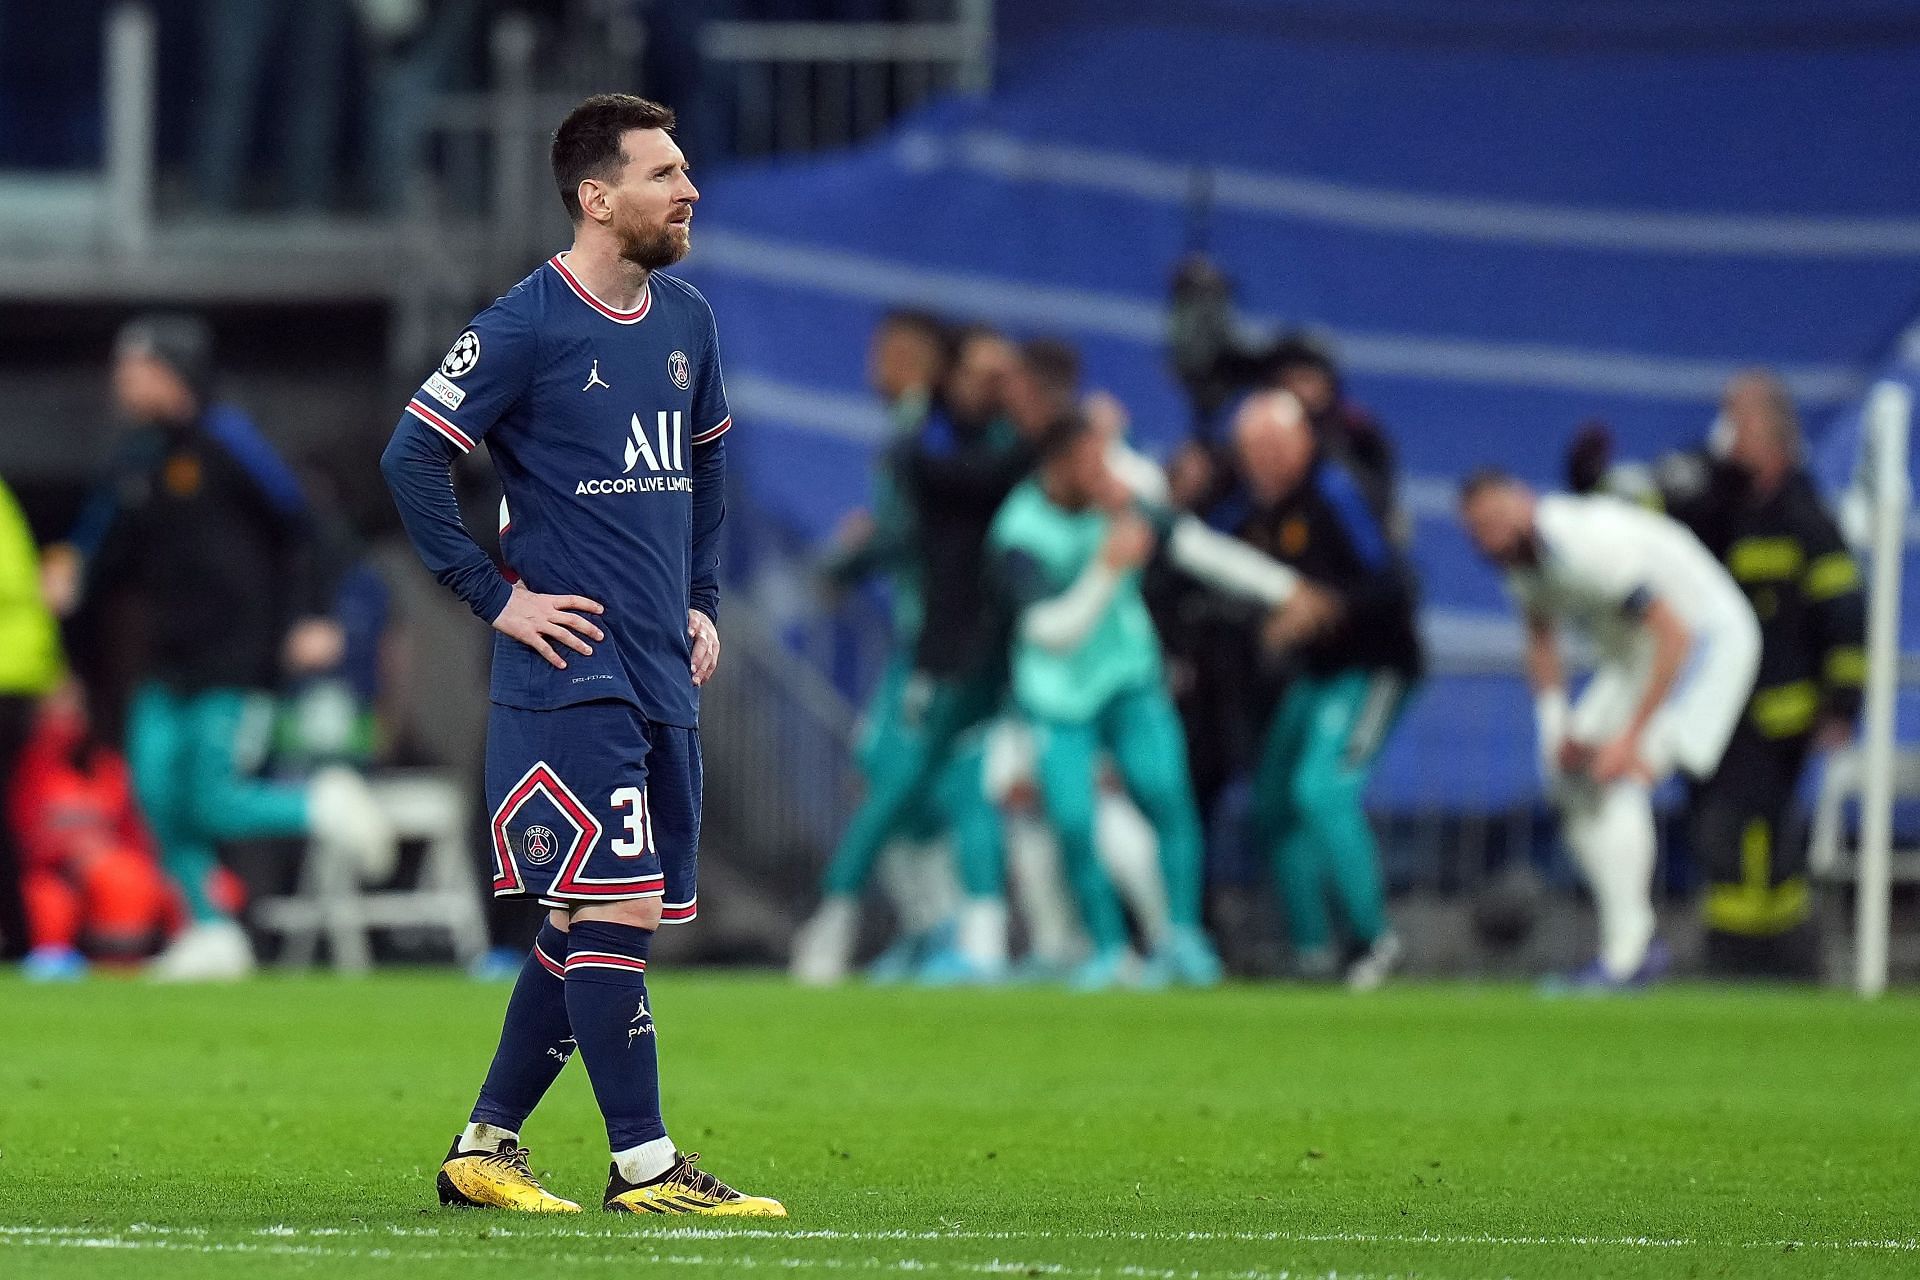 The Parisians are enduring a difficult outing this season